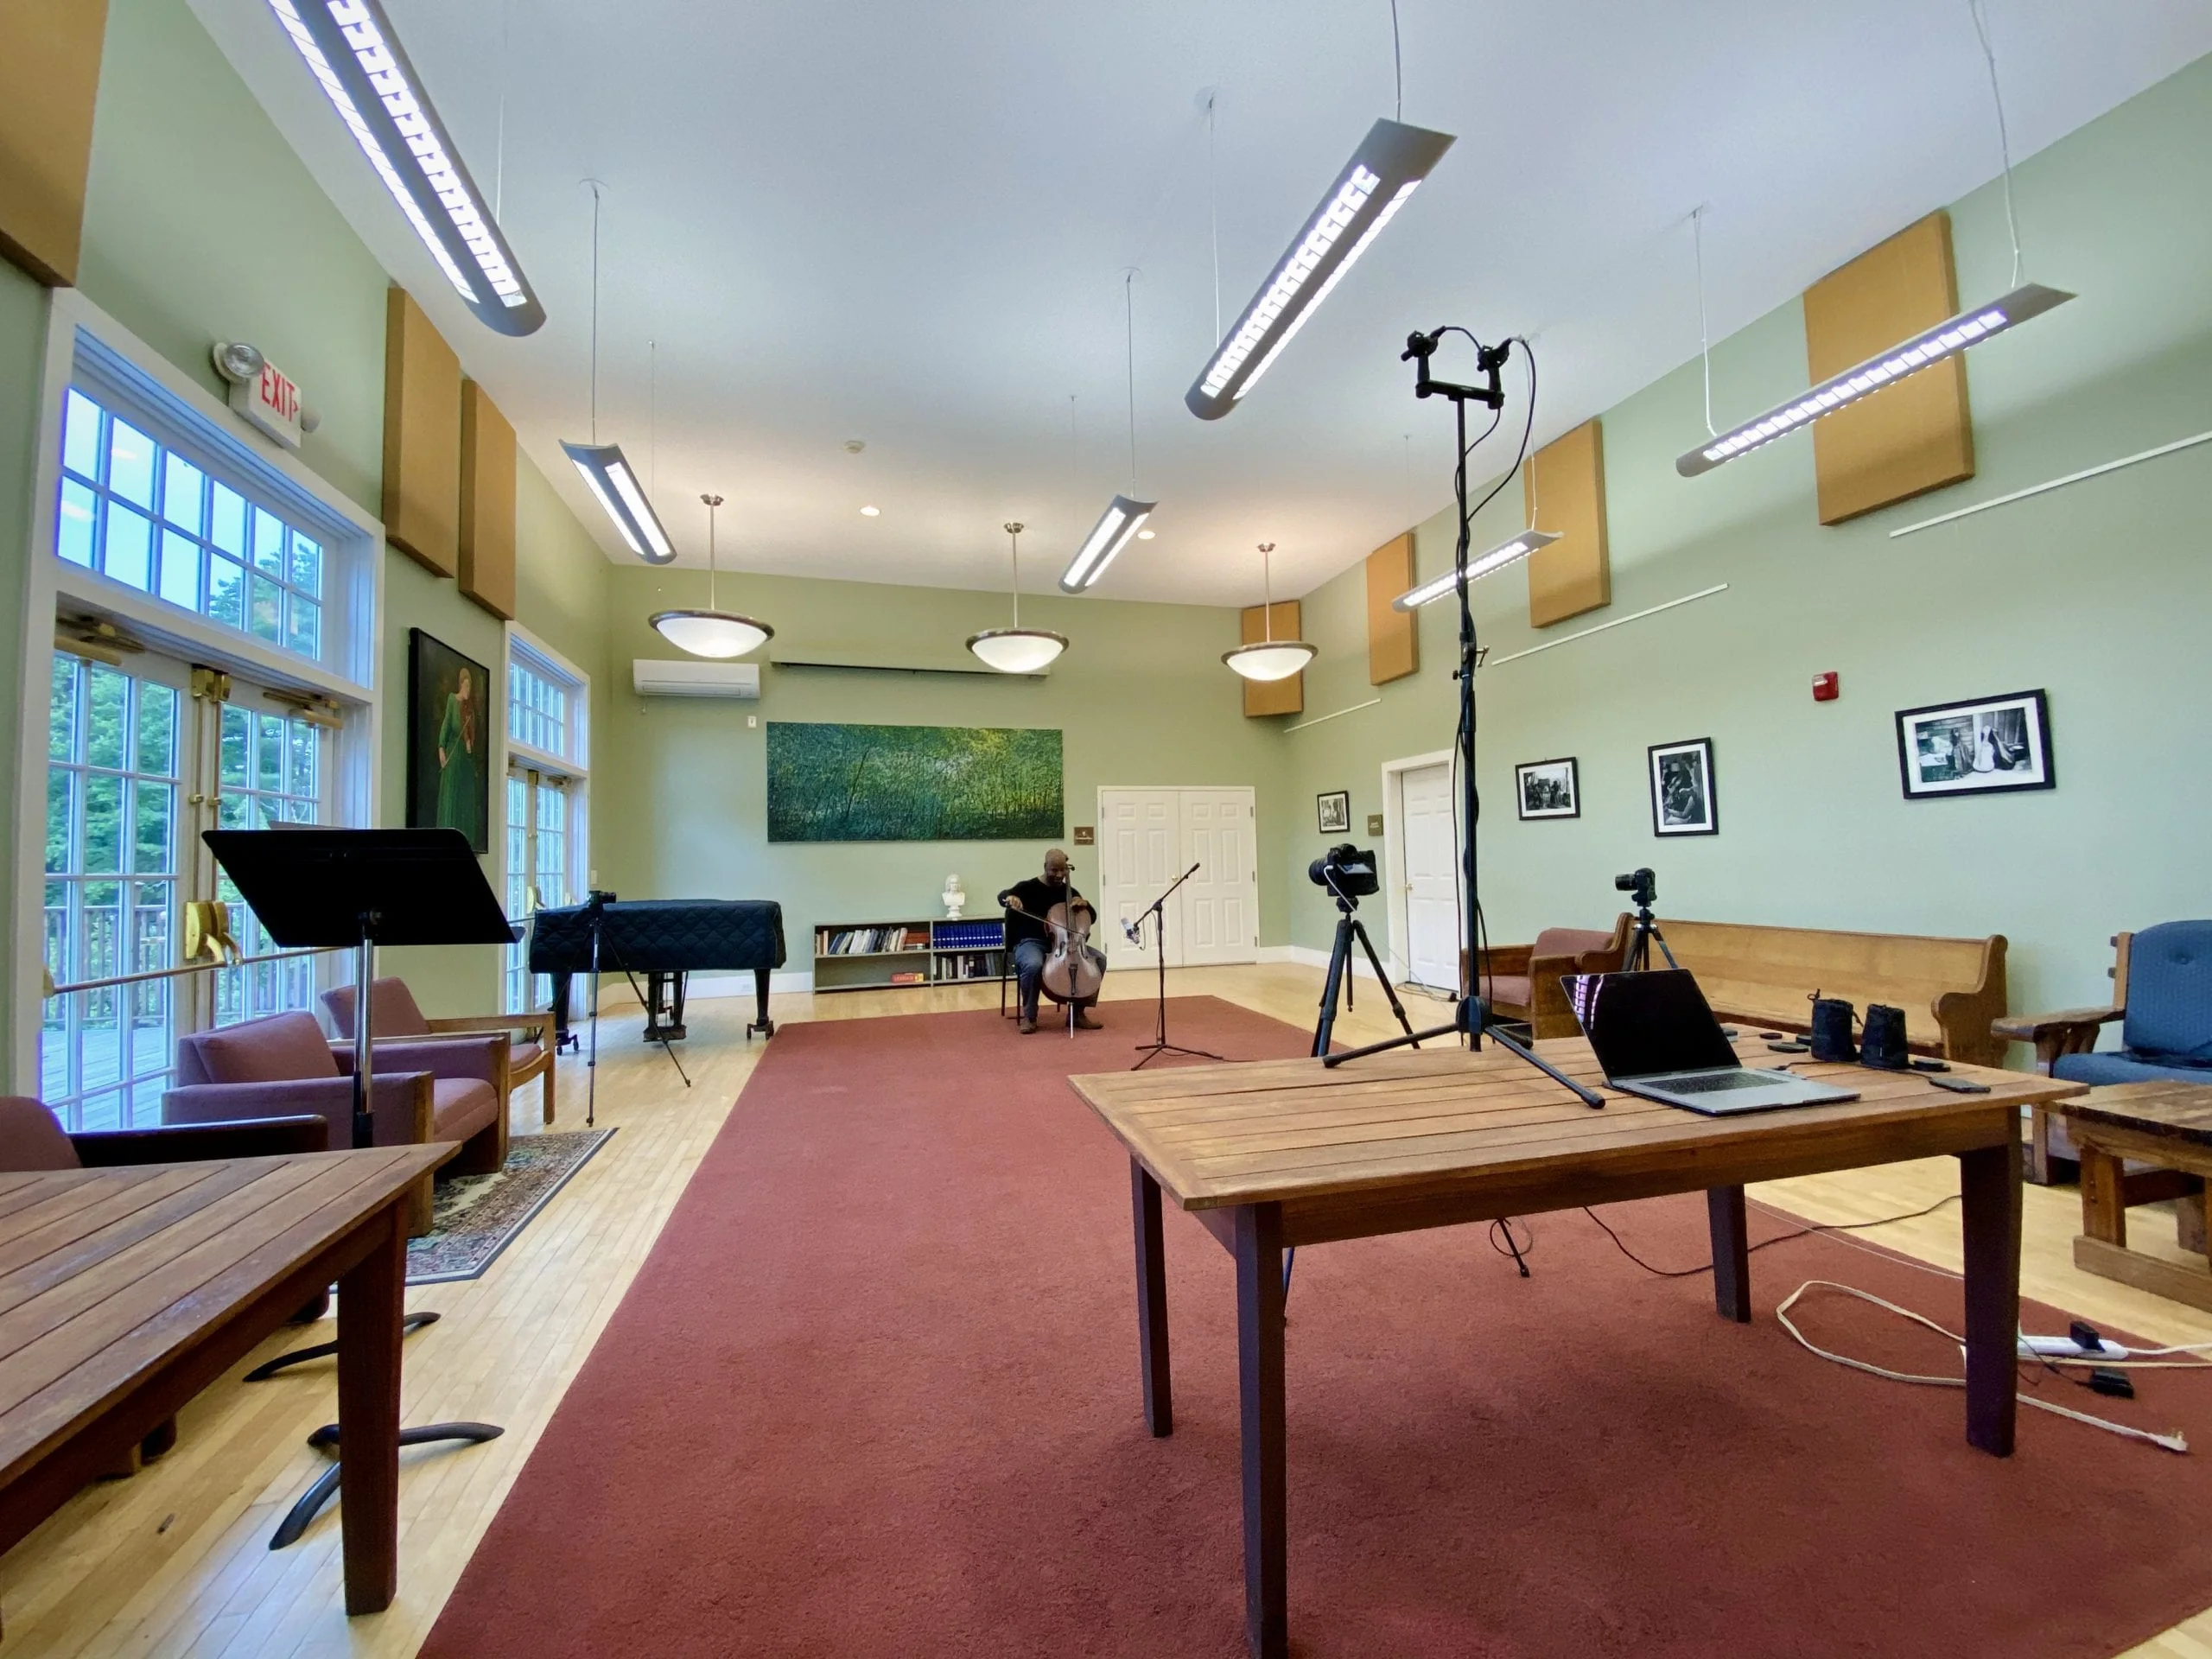 A room with recording devices focus on a musician playing a cello.